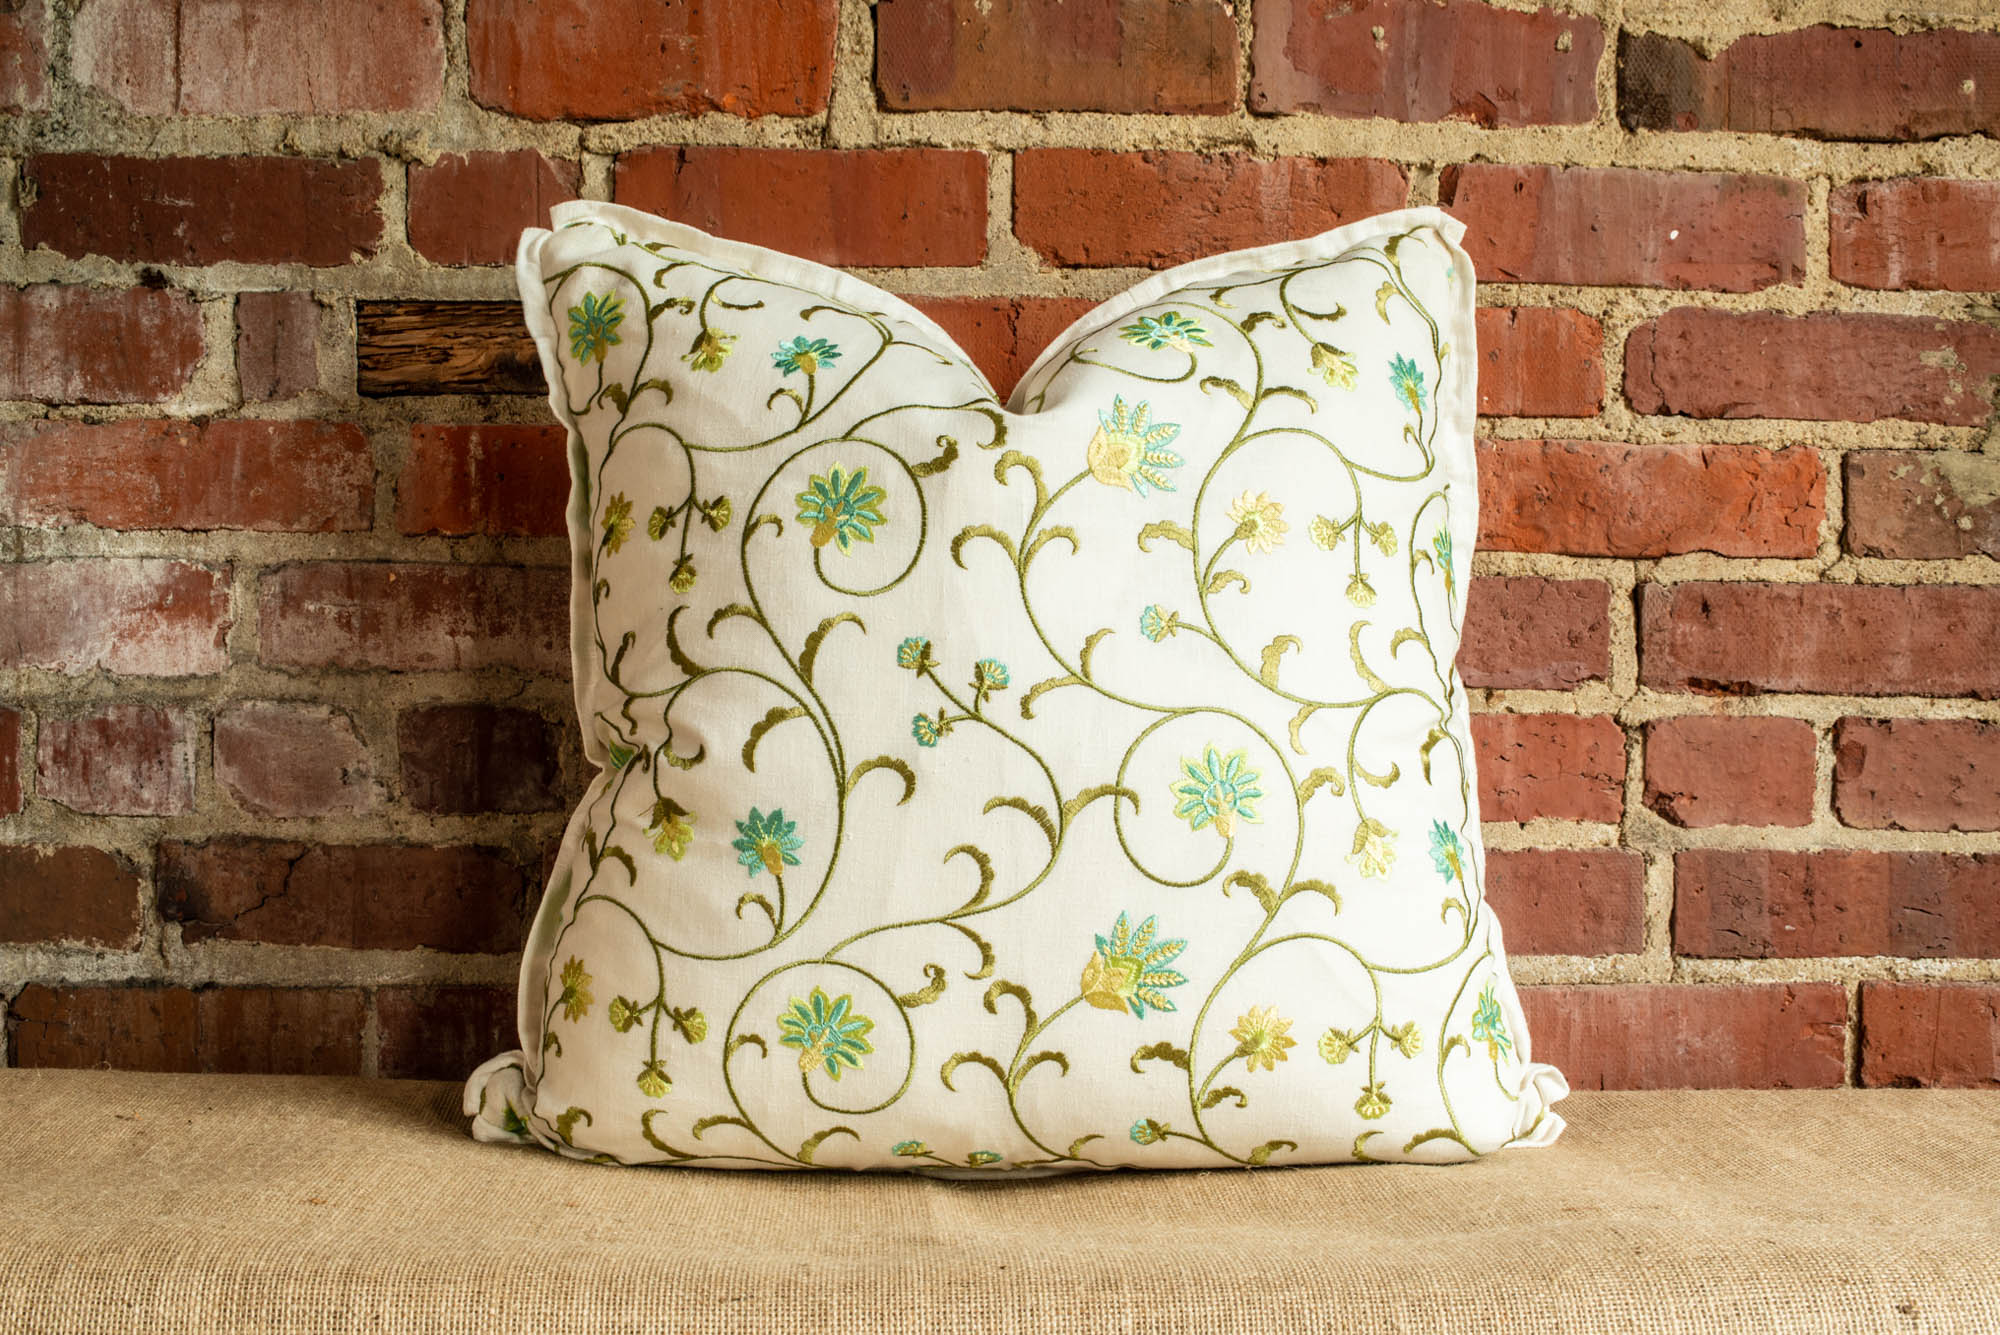 Vine and Floral Embroidered Pillow